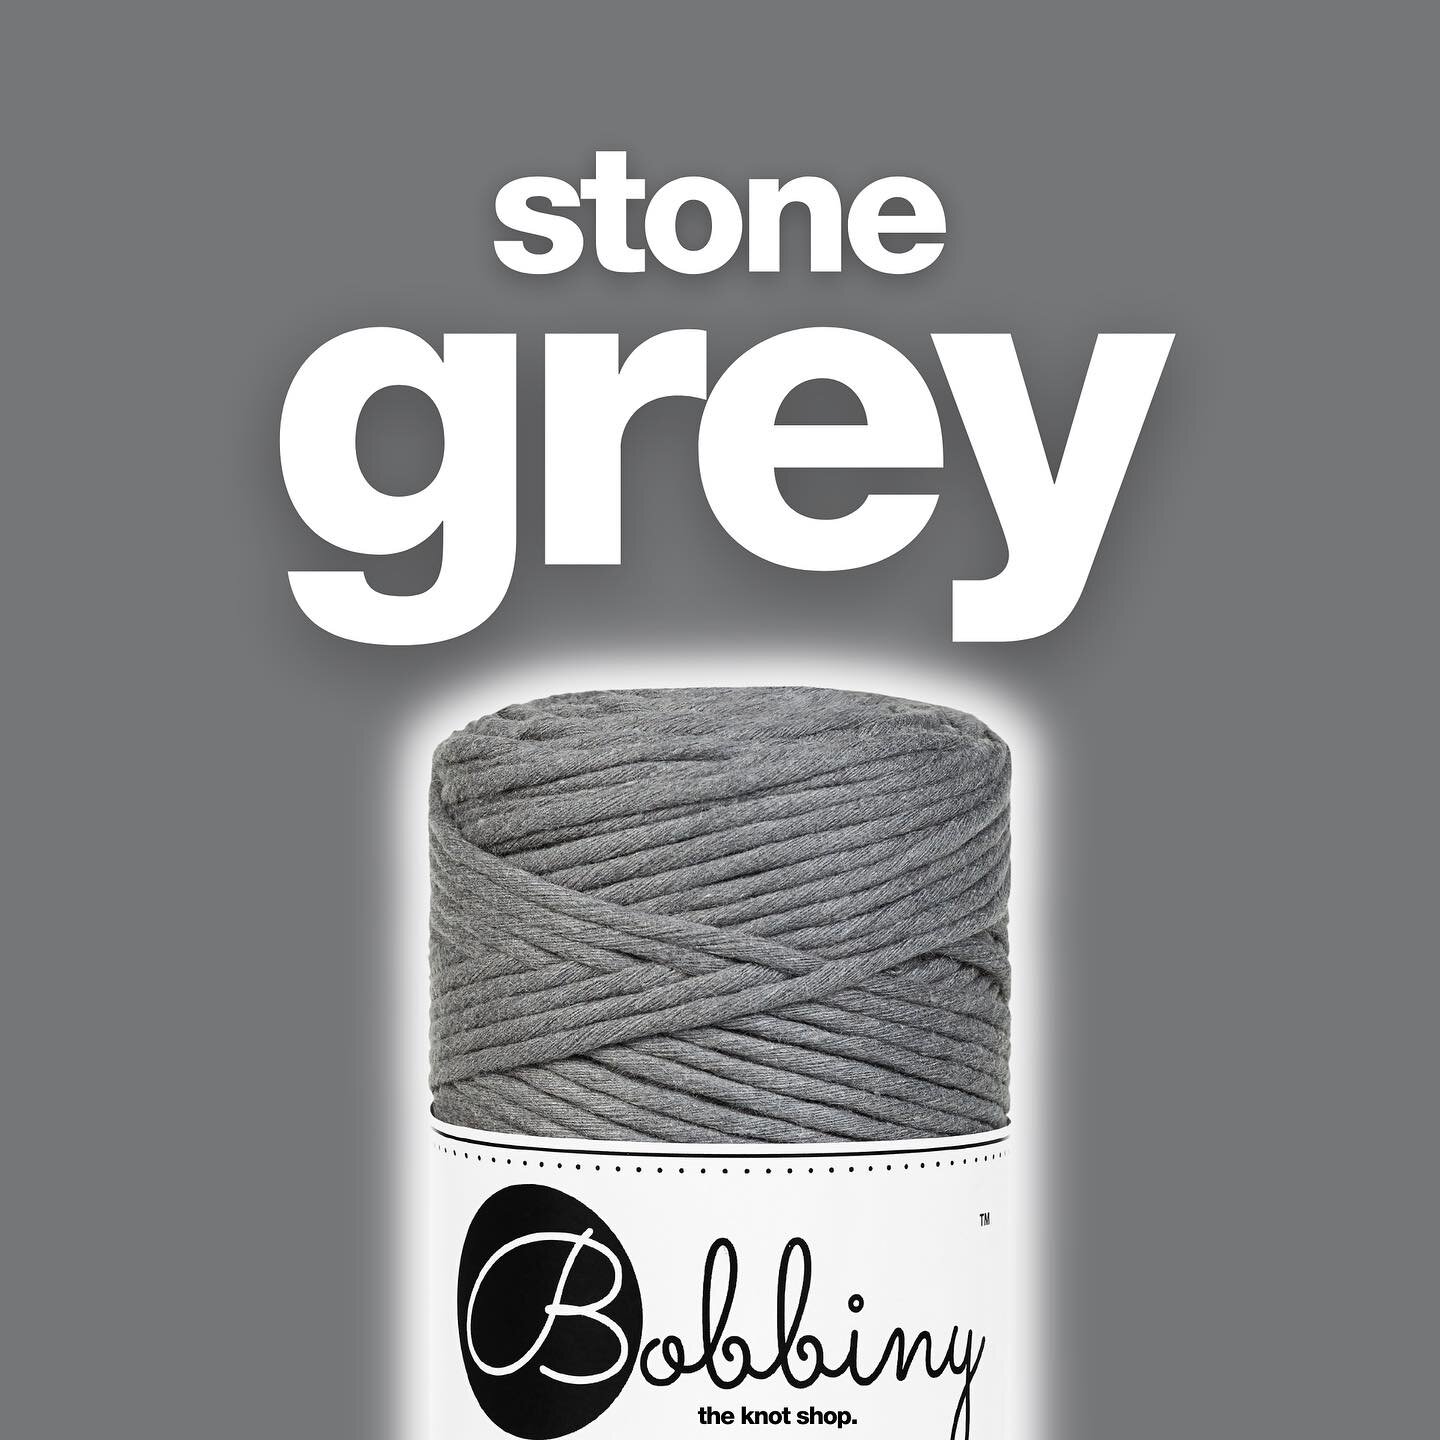 your new fave neutral: 𝚜𝚝𝚘𝚗𝚎 𝚐𝚛𝚎𝚢 🩶 this new dark grey shade is bringing classic + minimalistic vibes! the perfect choice for elegant projects + modern accessories 👌🏻

the third new cord colour from bobbiny's 2023 𝚊𝚞𝚝𝚞𝚖𝚗-𝚠𝚒𝚗𝚝𝚎?